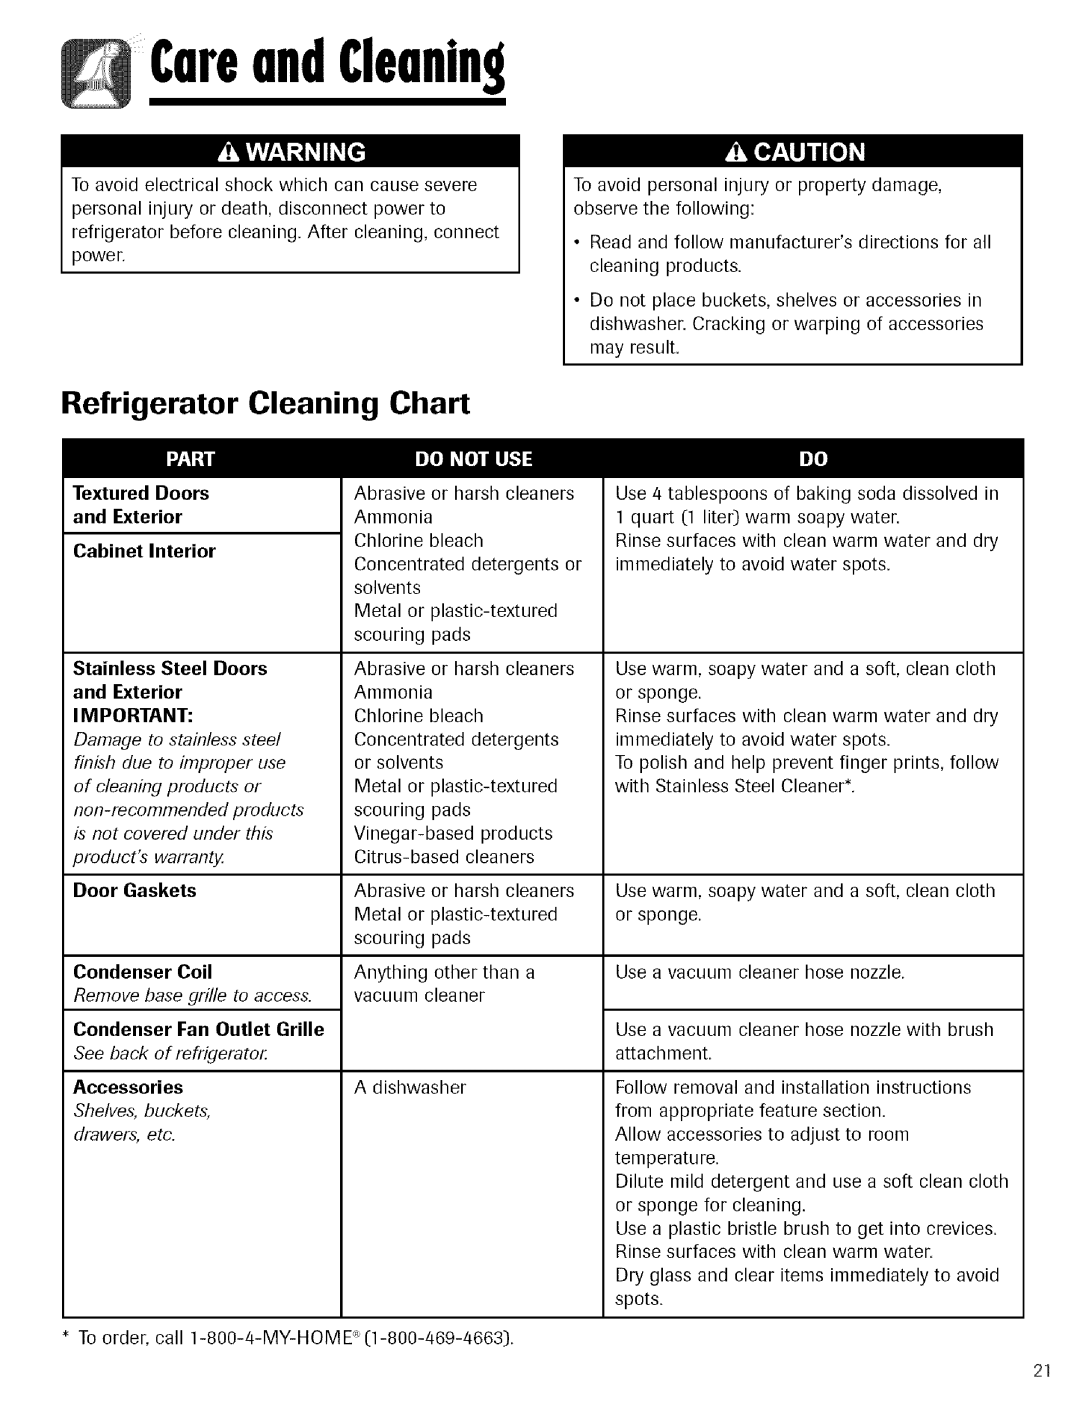 Kenmore 596.755024 manual andCleaning, Refrigerator Cleaning Chart 